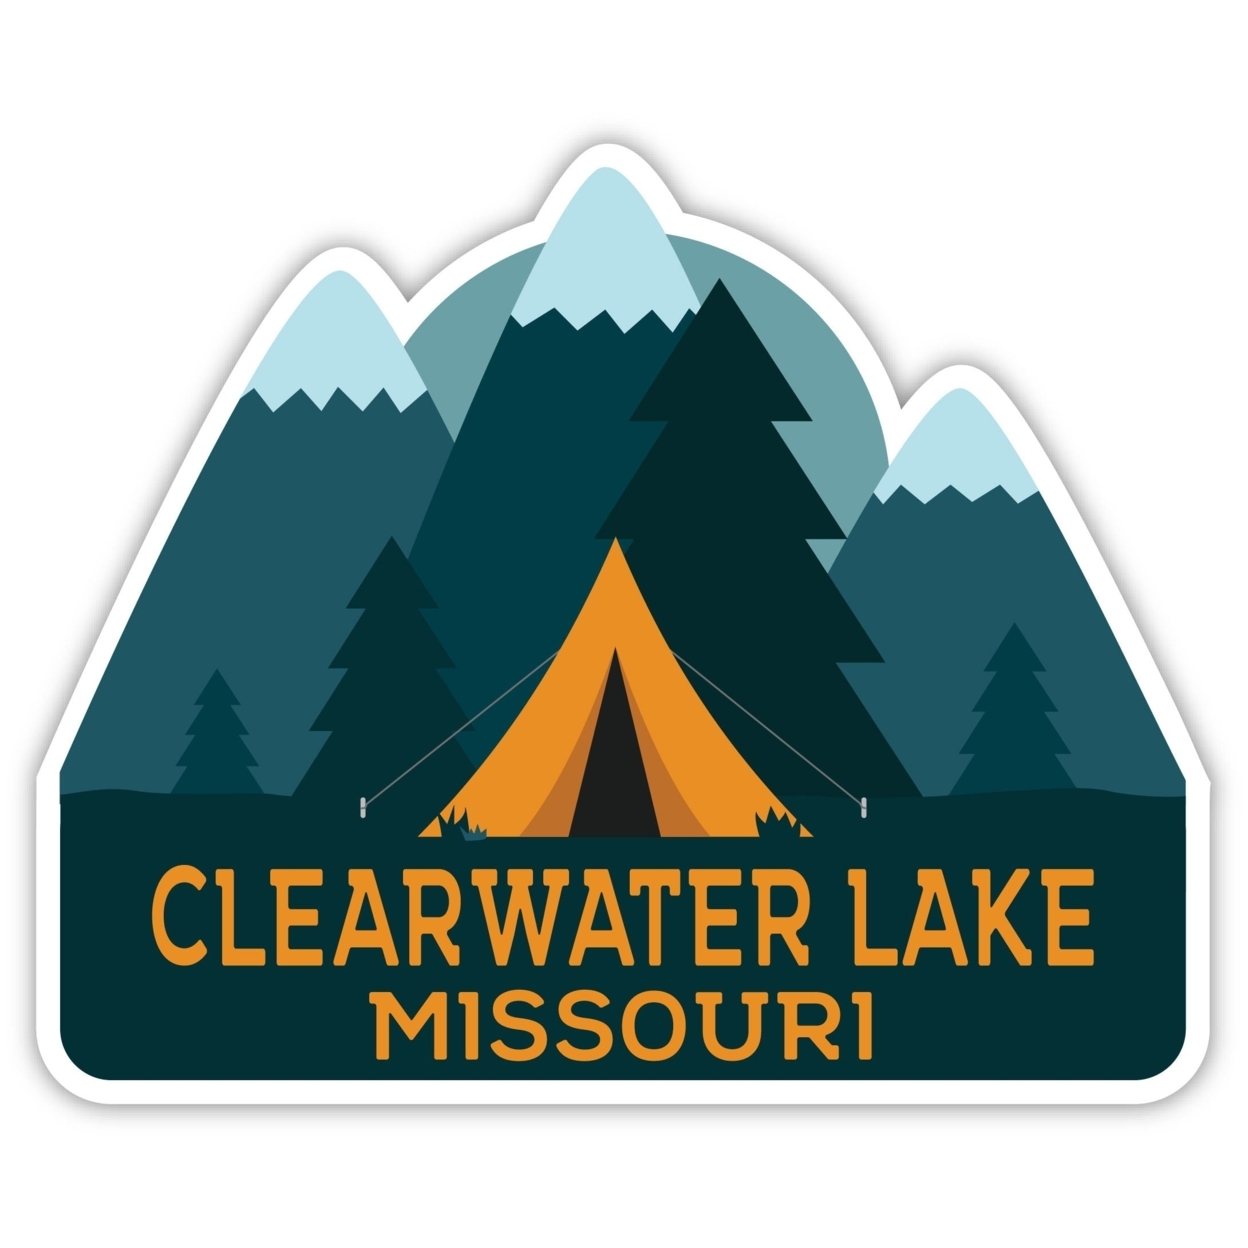 Clearwater Lake Missouri Souvenir Decorative Stickers (Choose Theme And Size) - 4-Pack, 8-Inch, Tent